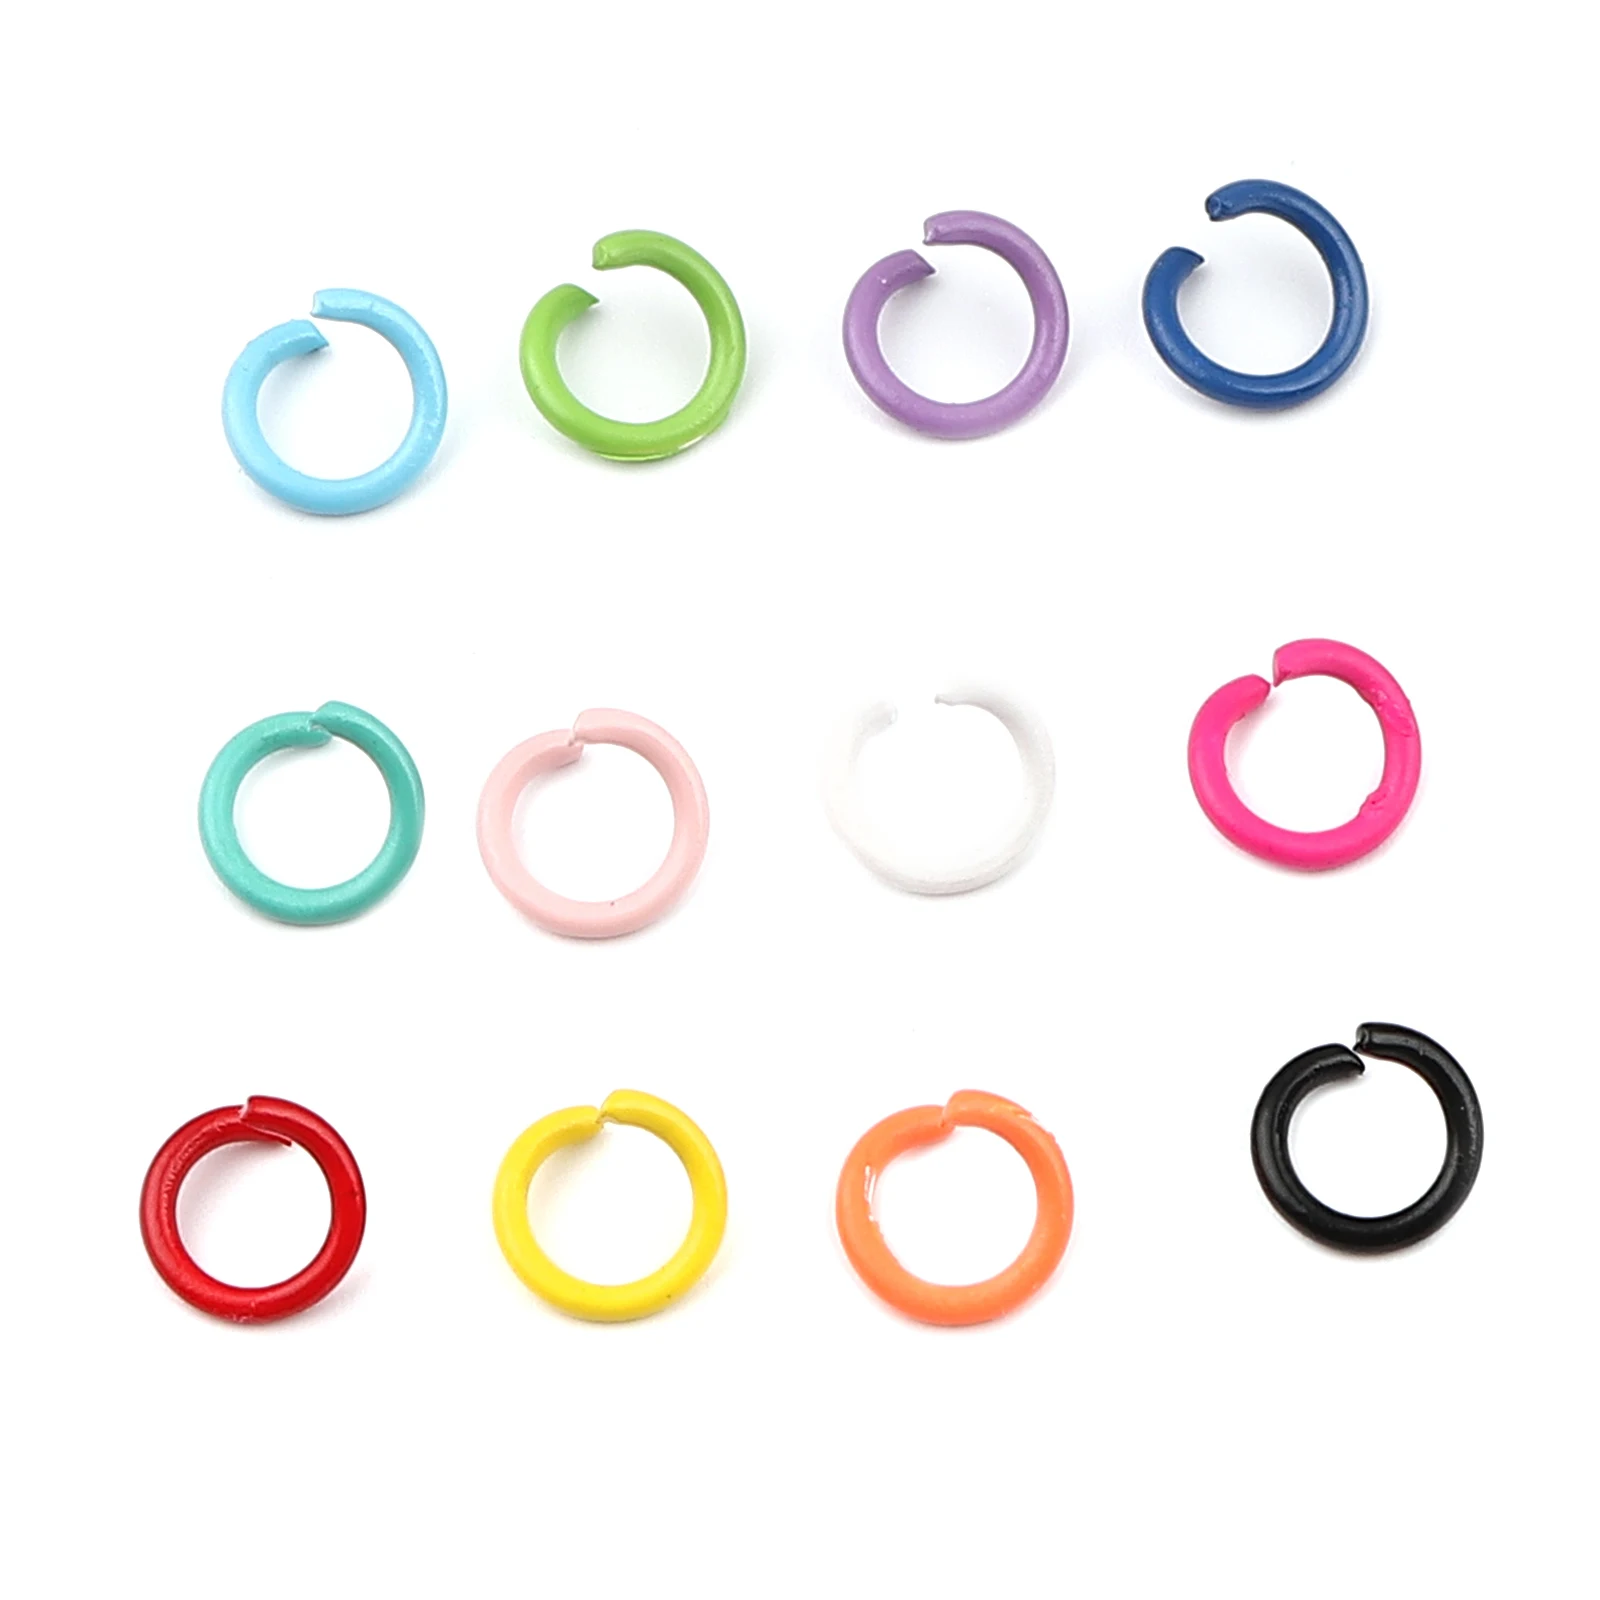 

200pcs/lot 1.2x8mm Colorful Metal DIY Jewelry Findings Open Single Loops Jump Rings & Split Ring For Jewelry Making